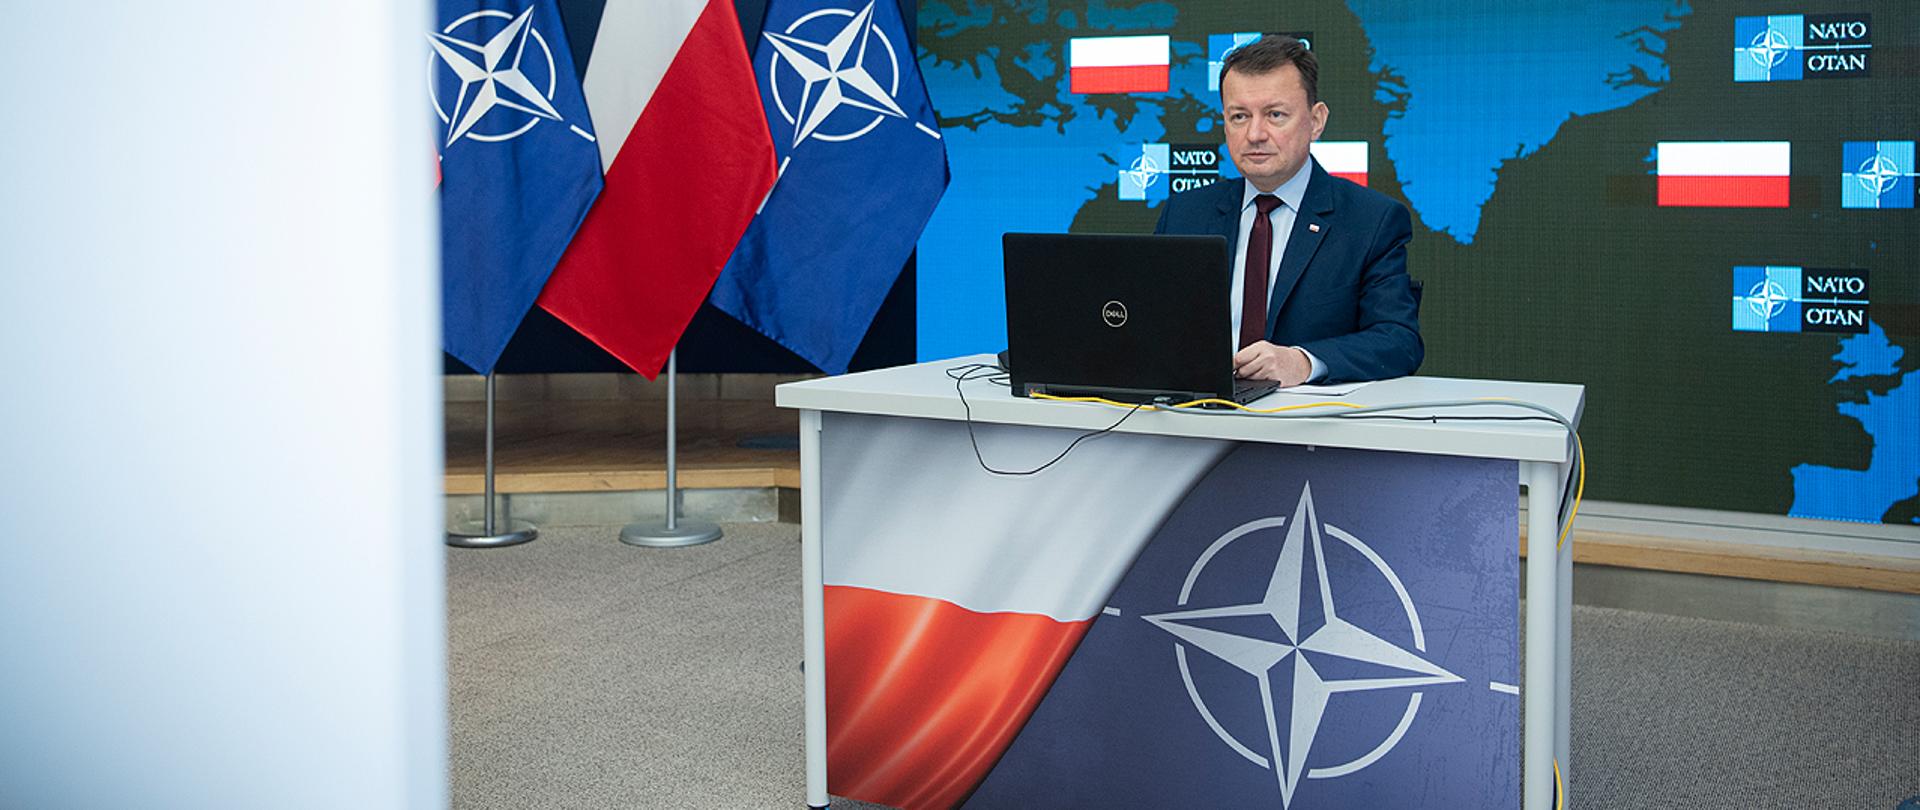 Poland co-hosts a NATO deterrence and defence seminar1